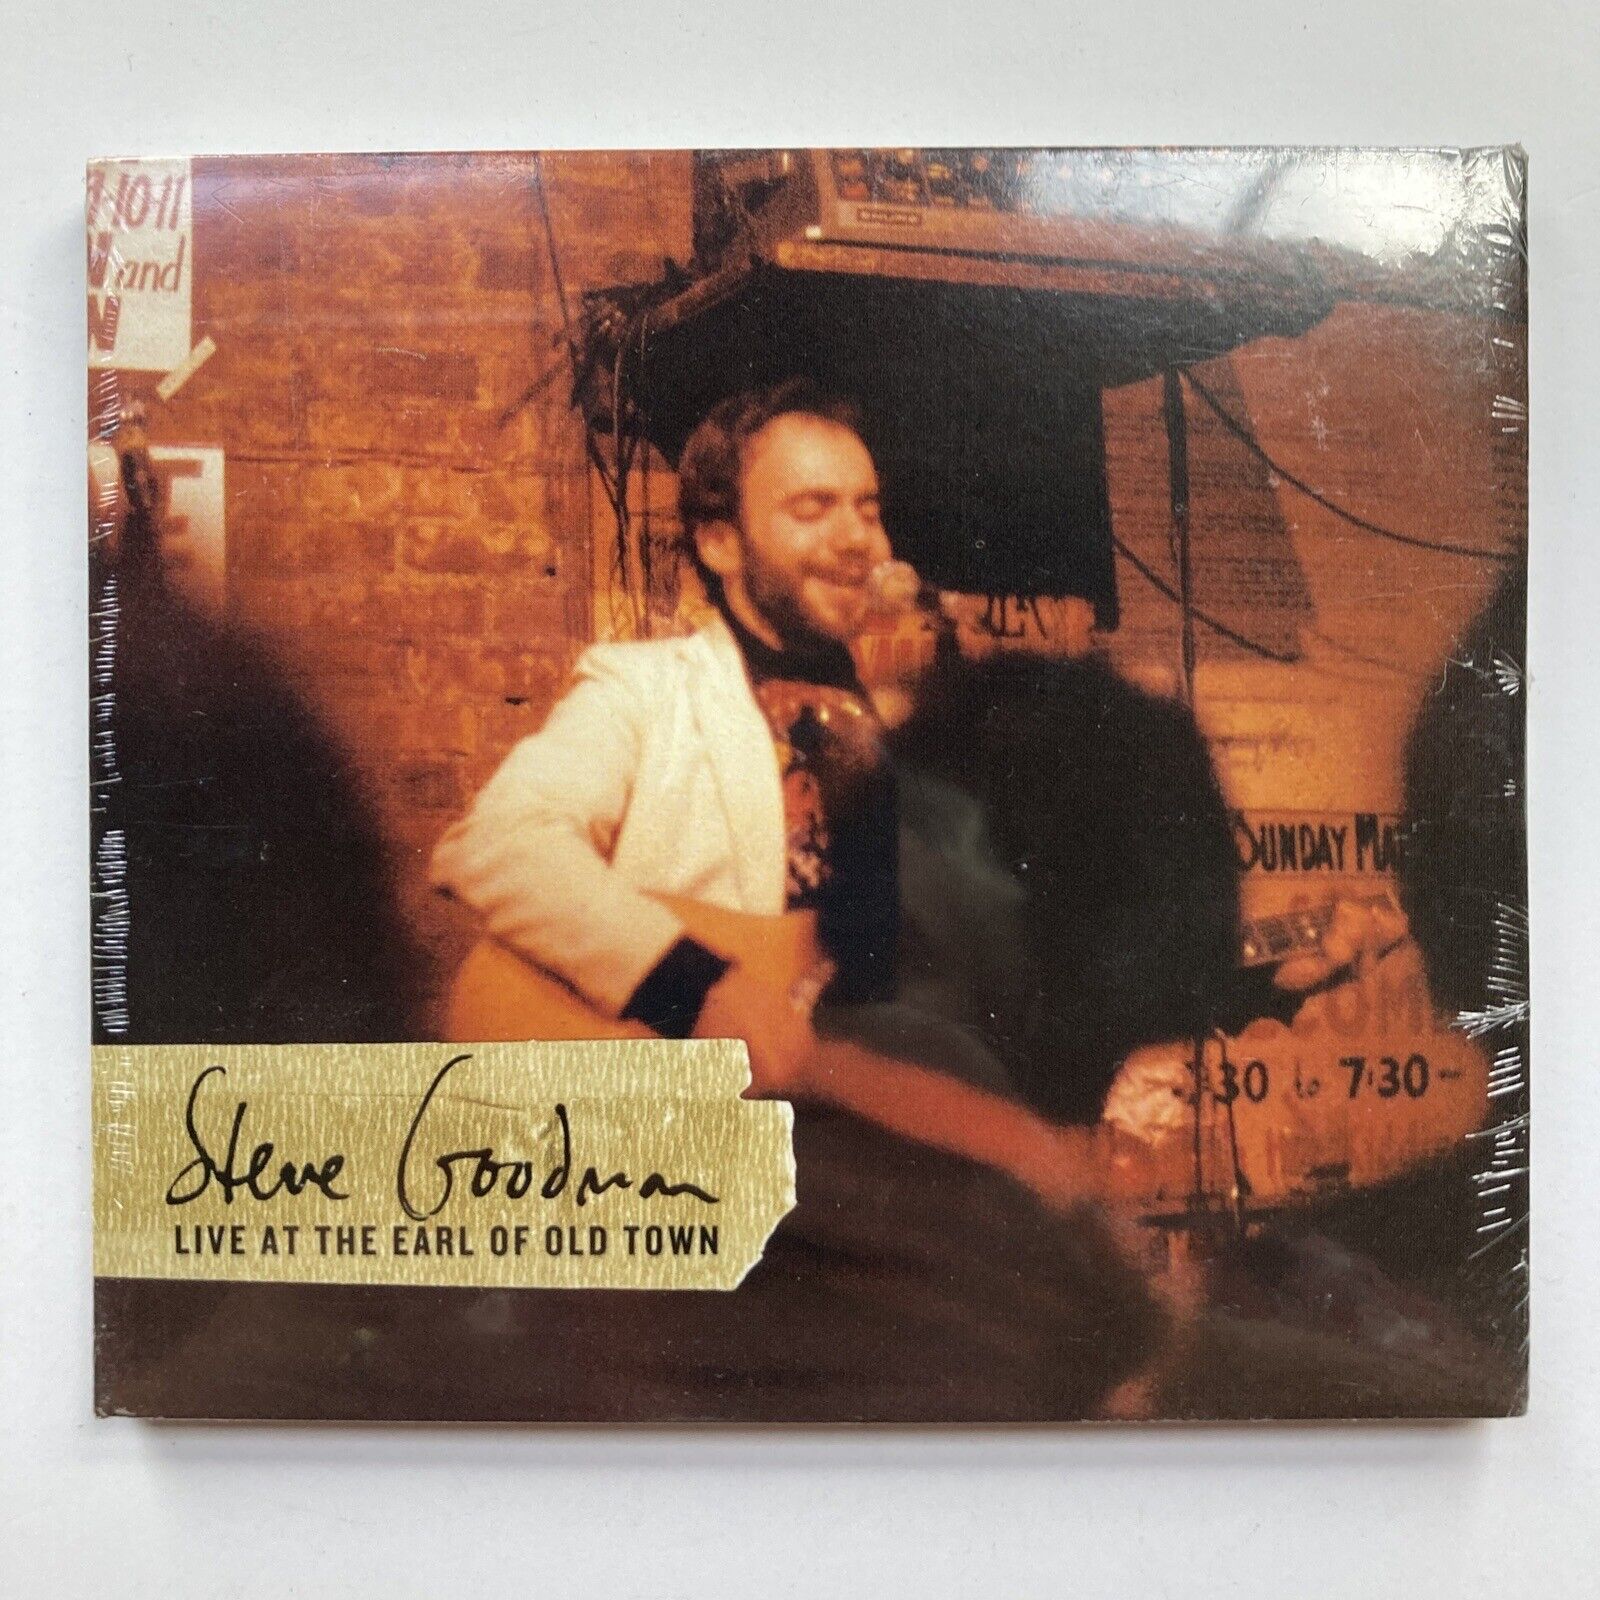 Live at the Earl of Old Town by Steve Goodman (CD, 2006) Brand New and Sealed